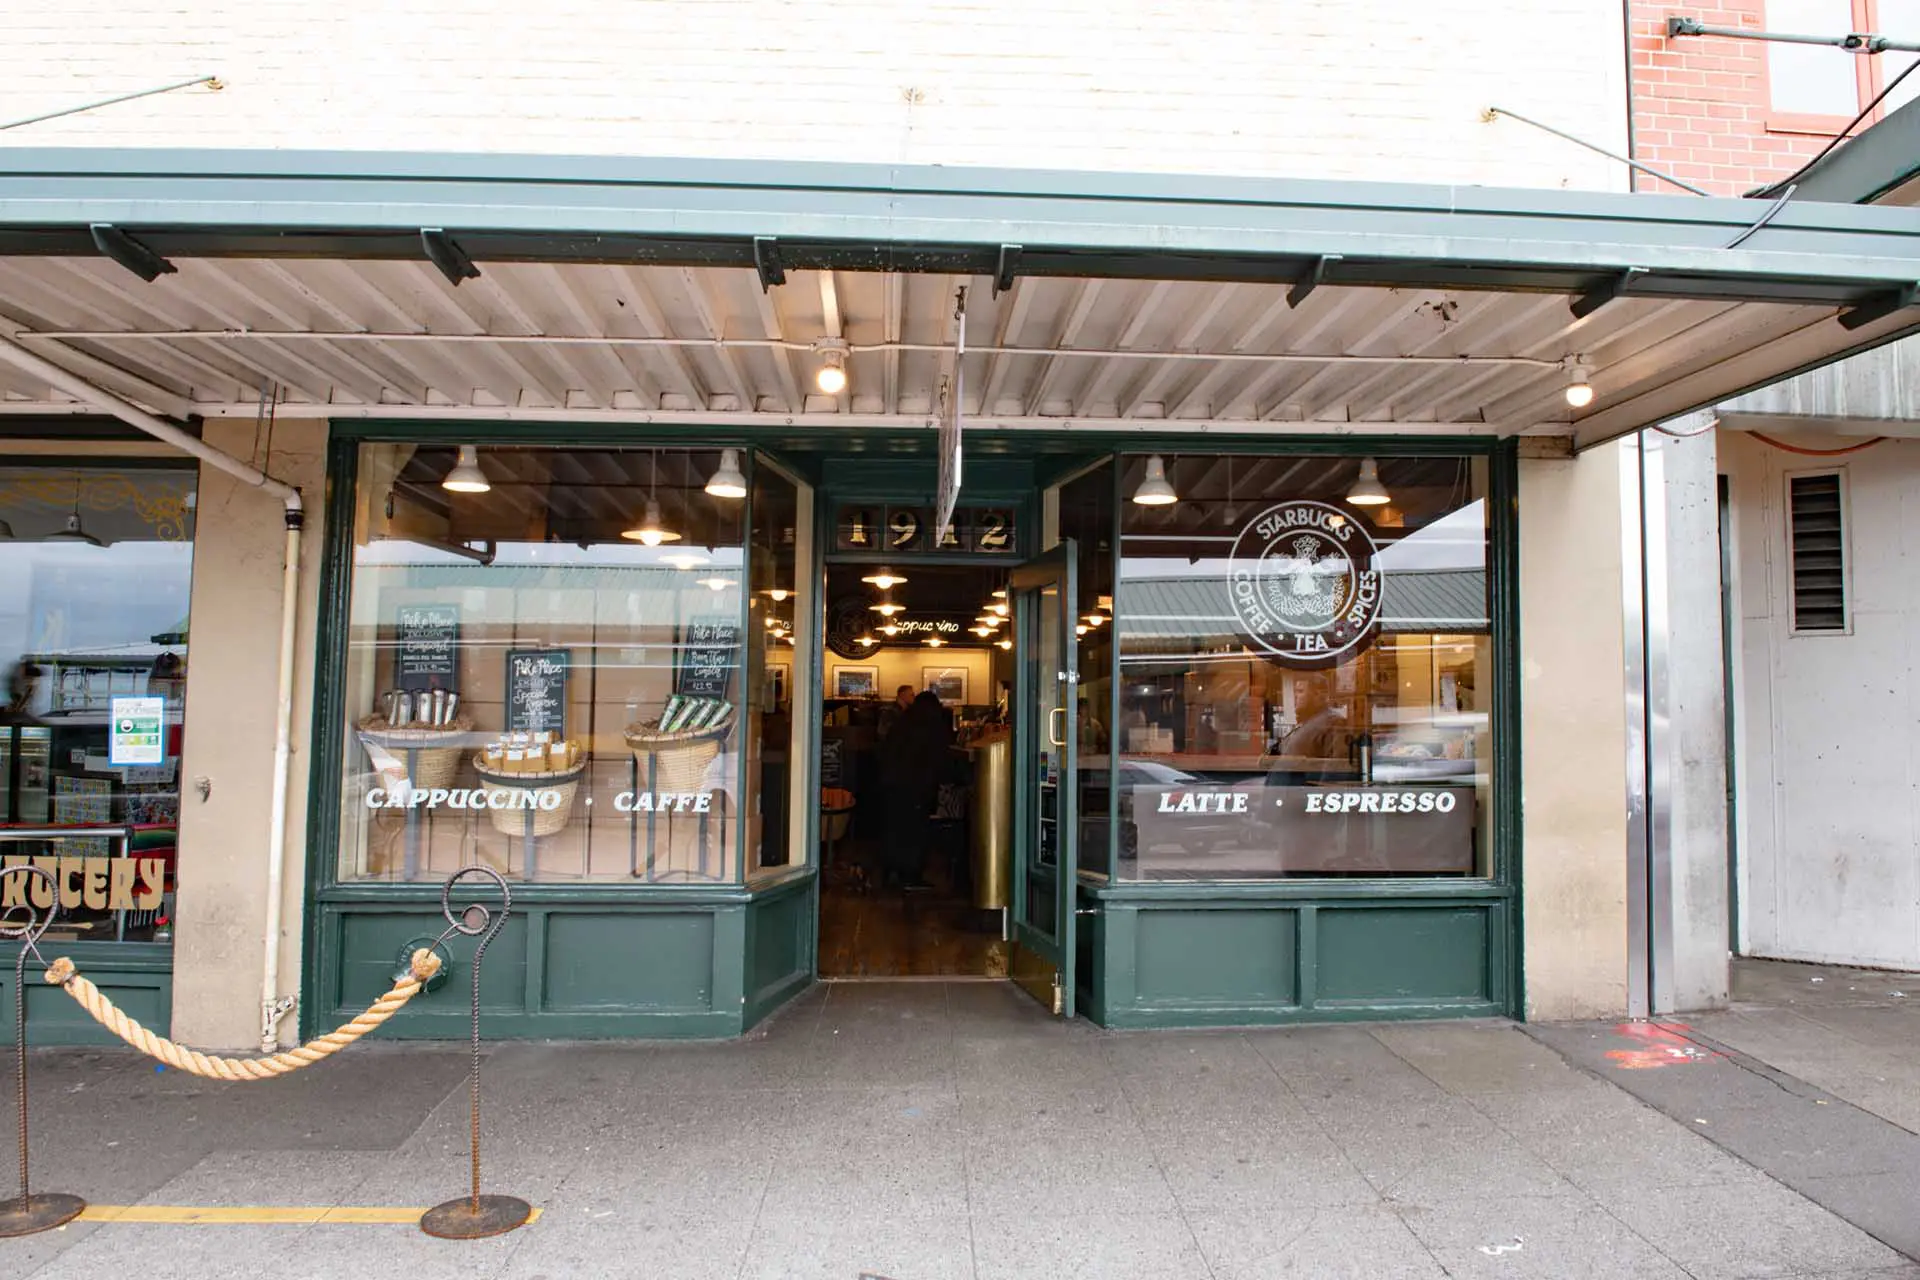 The First Starbucks - Pike Place Market